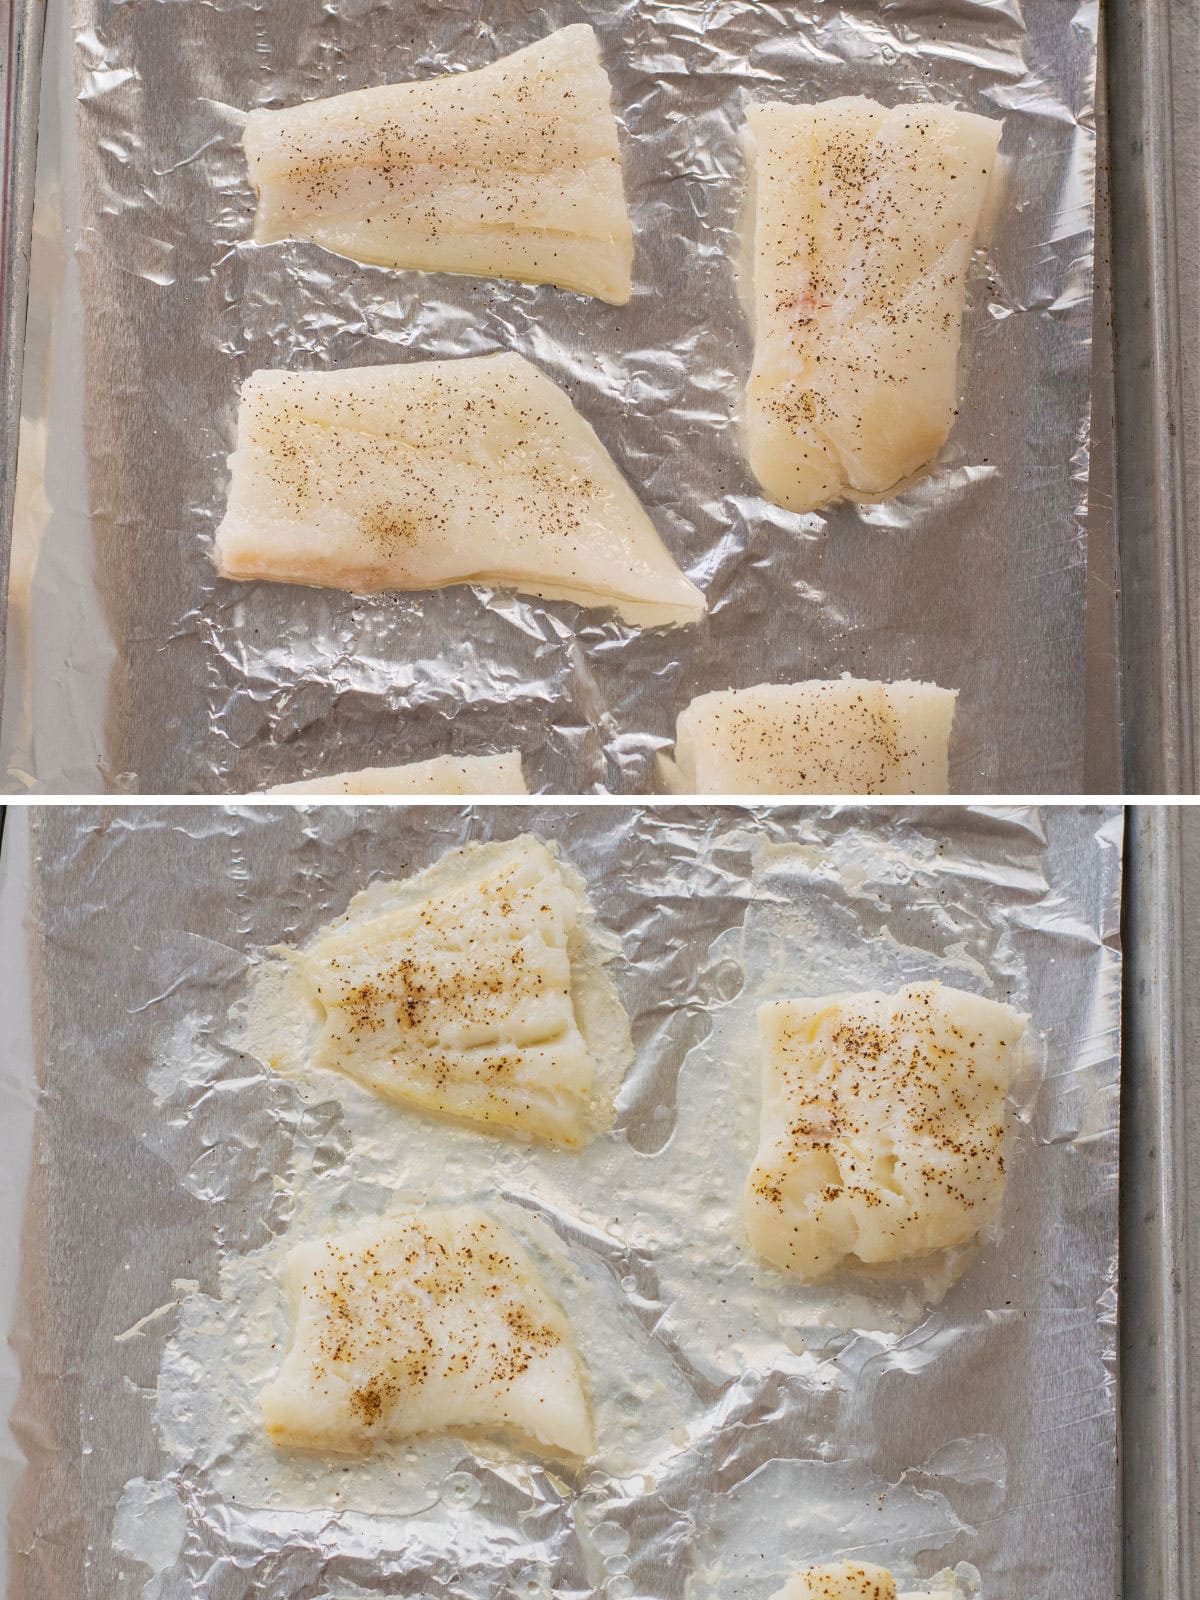 cod with oil and seasonings roasted in a foil lined pan